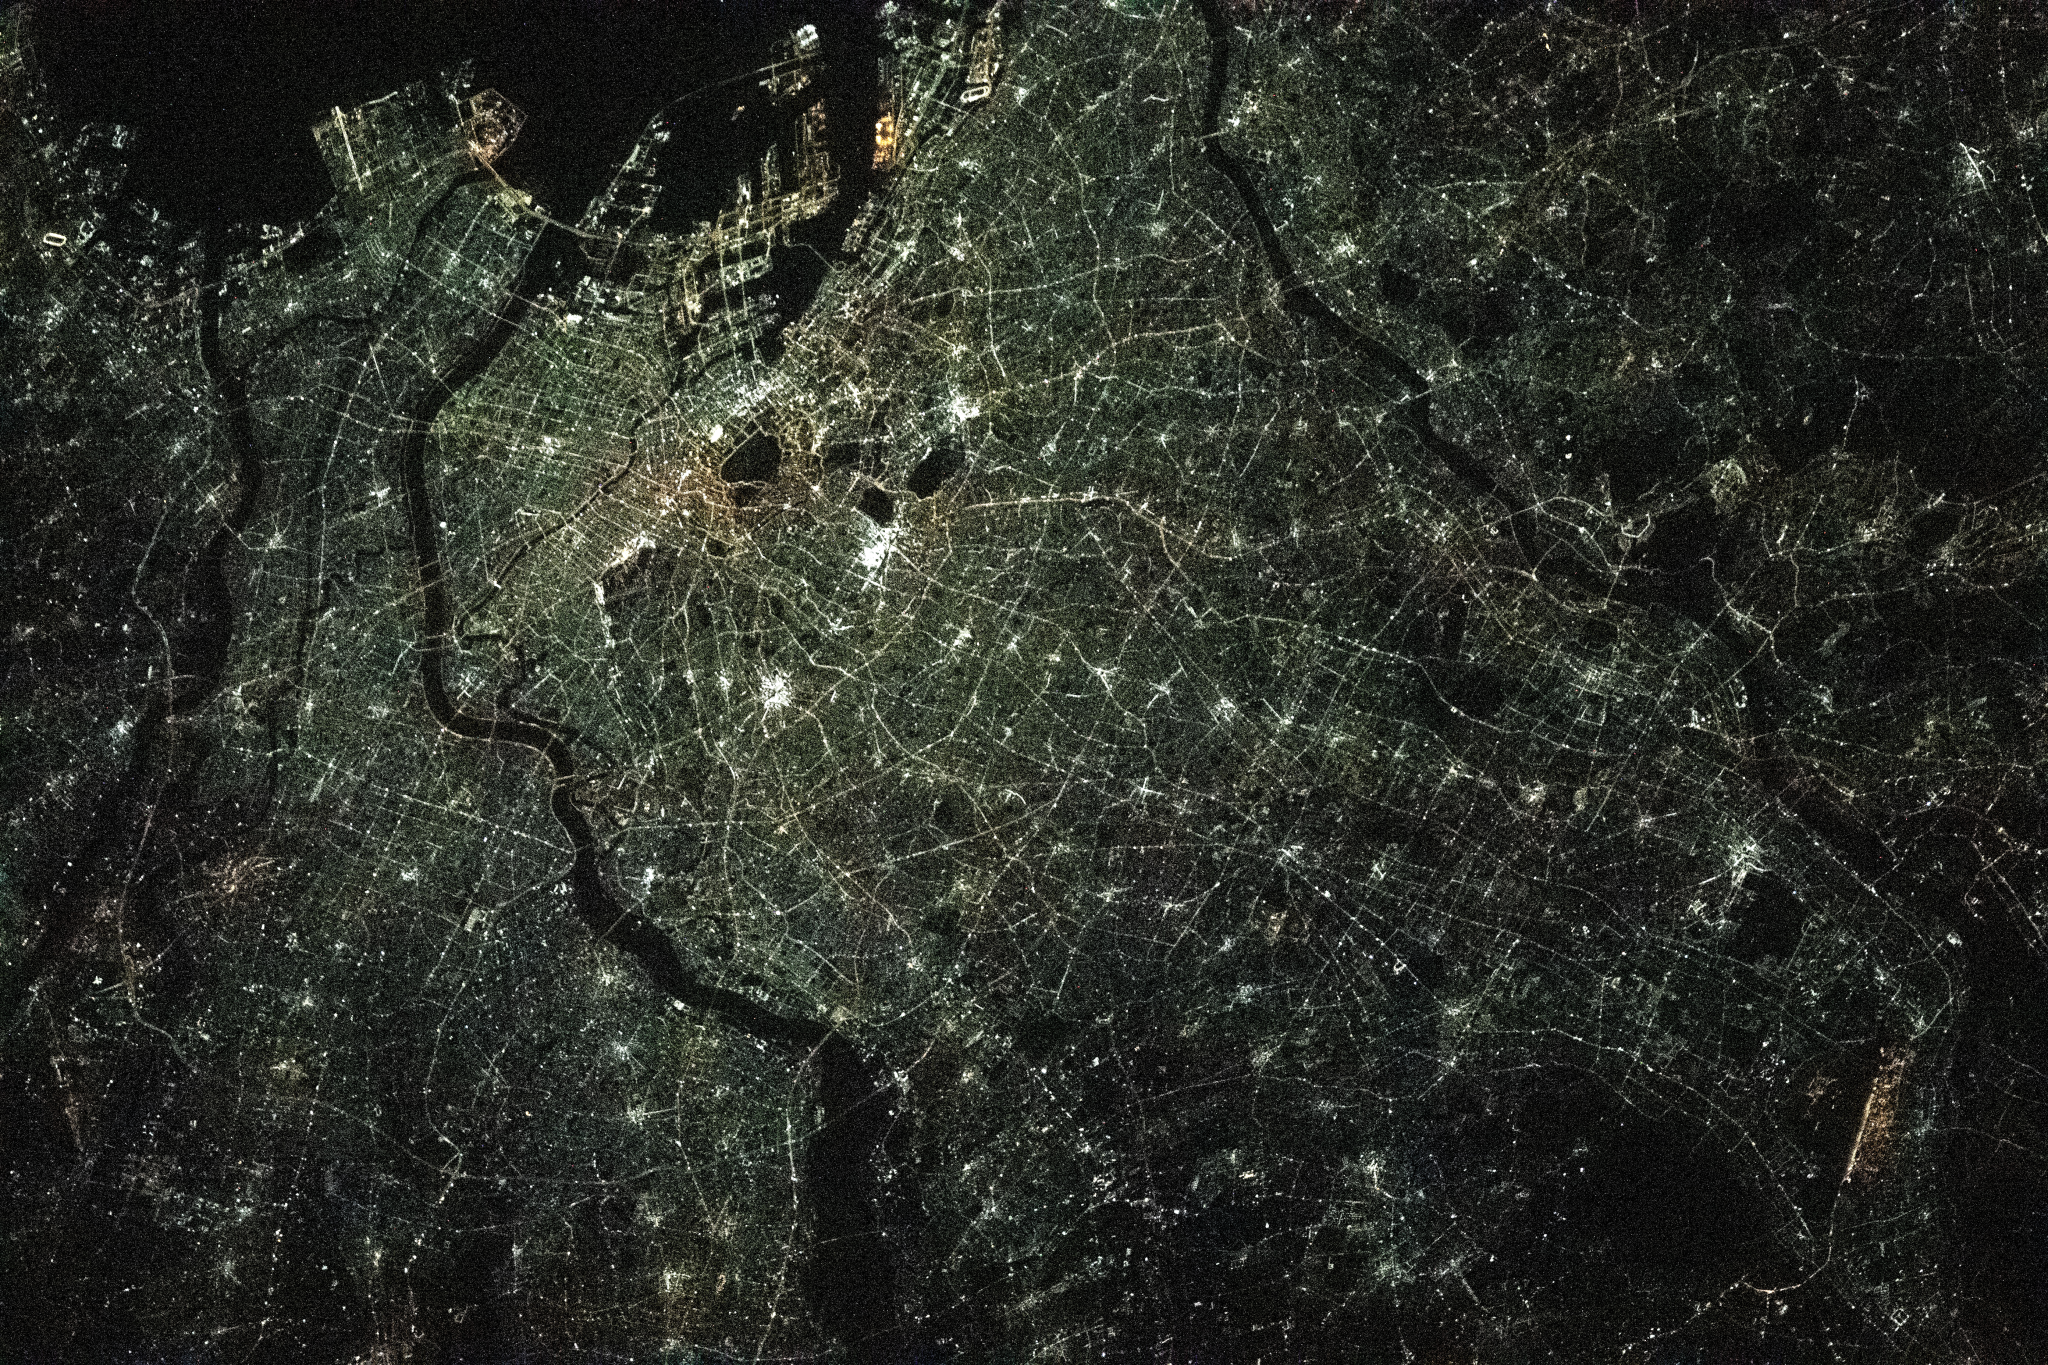 image of the city of Tokyo at night